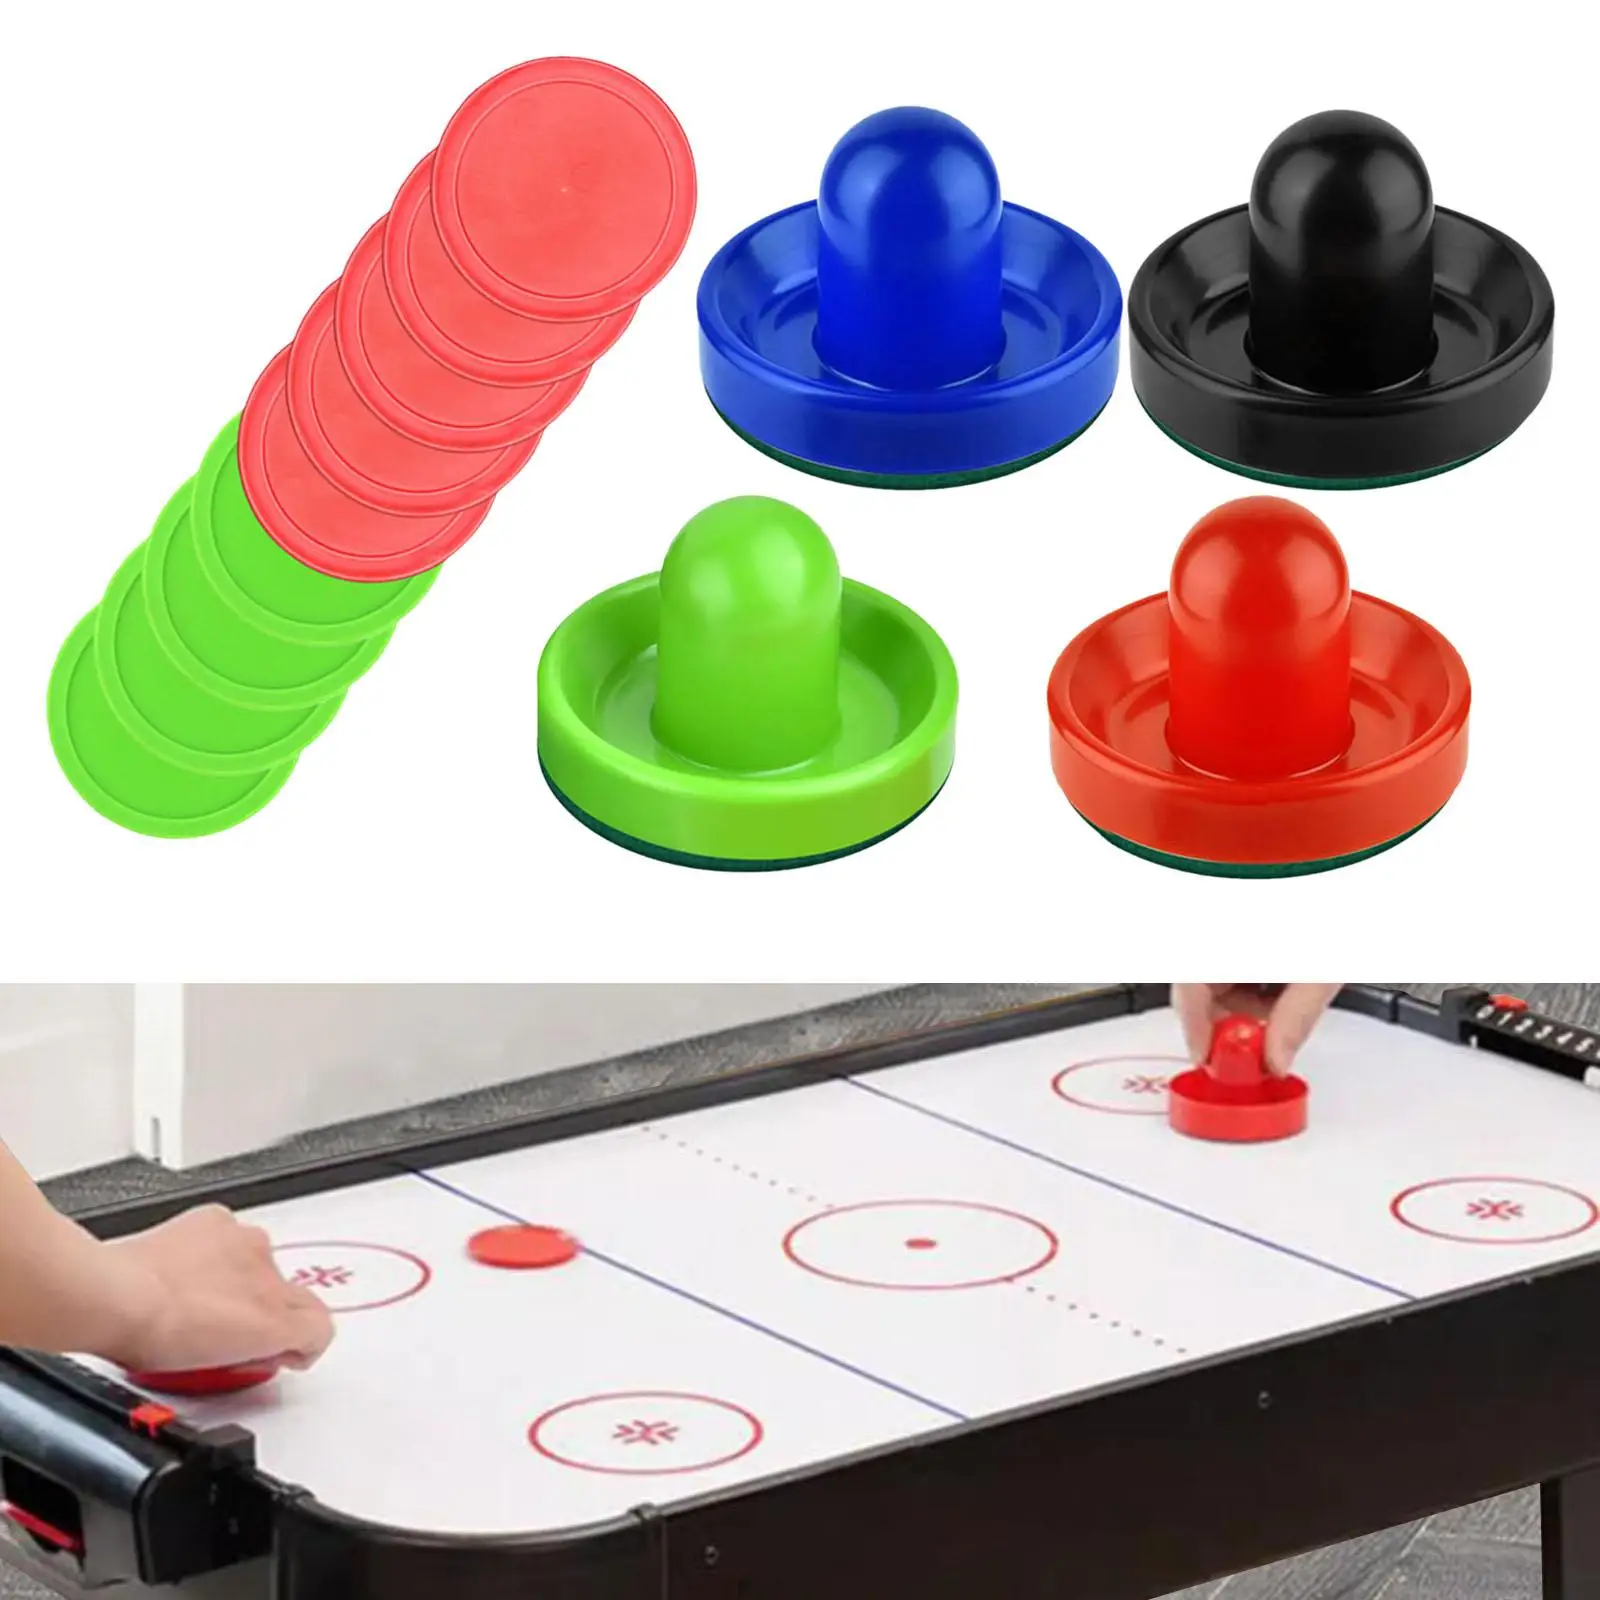 4 Air Hockey Pushers and 8 Pucks 2.5 inch Pucks for Home Table